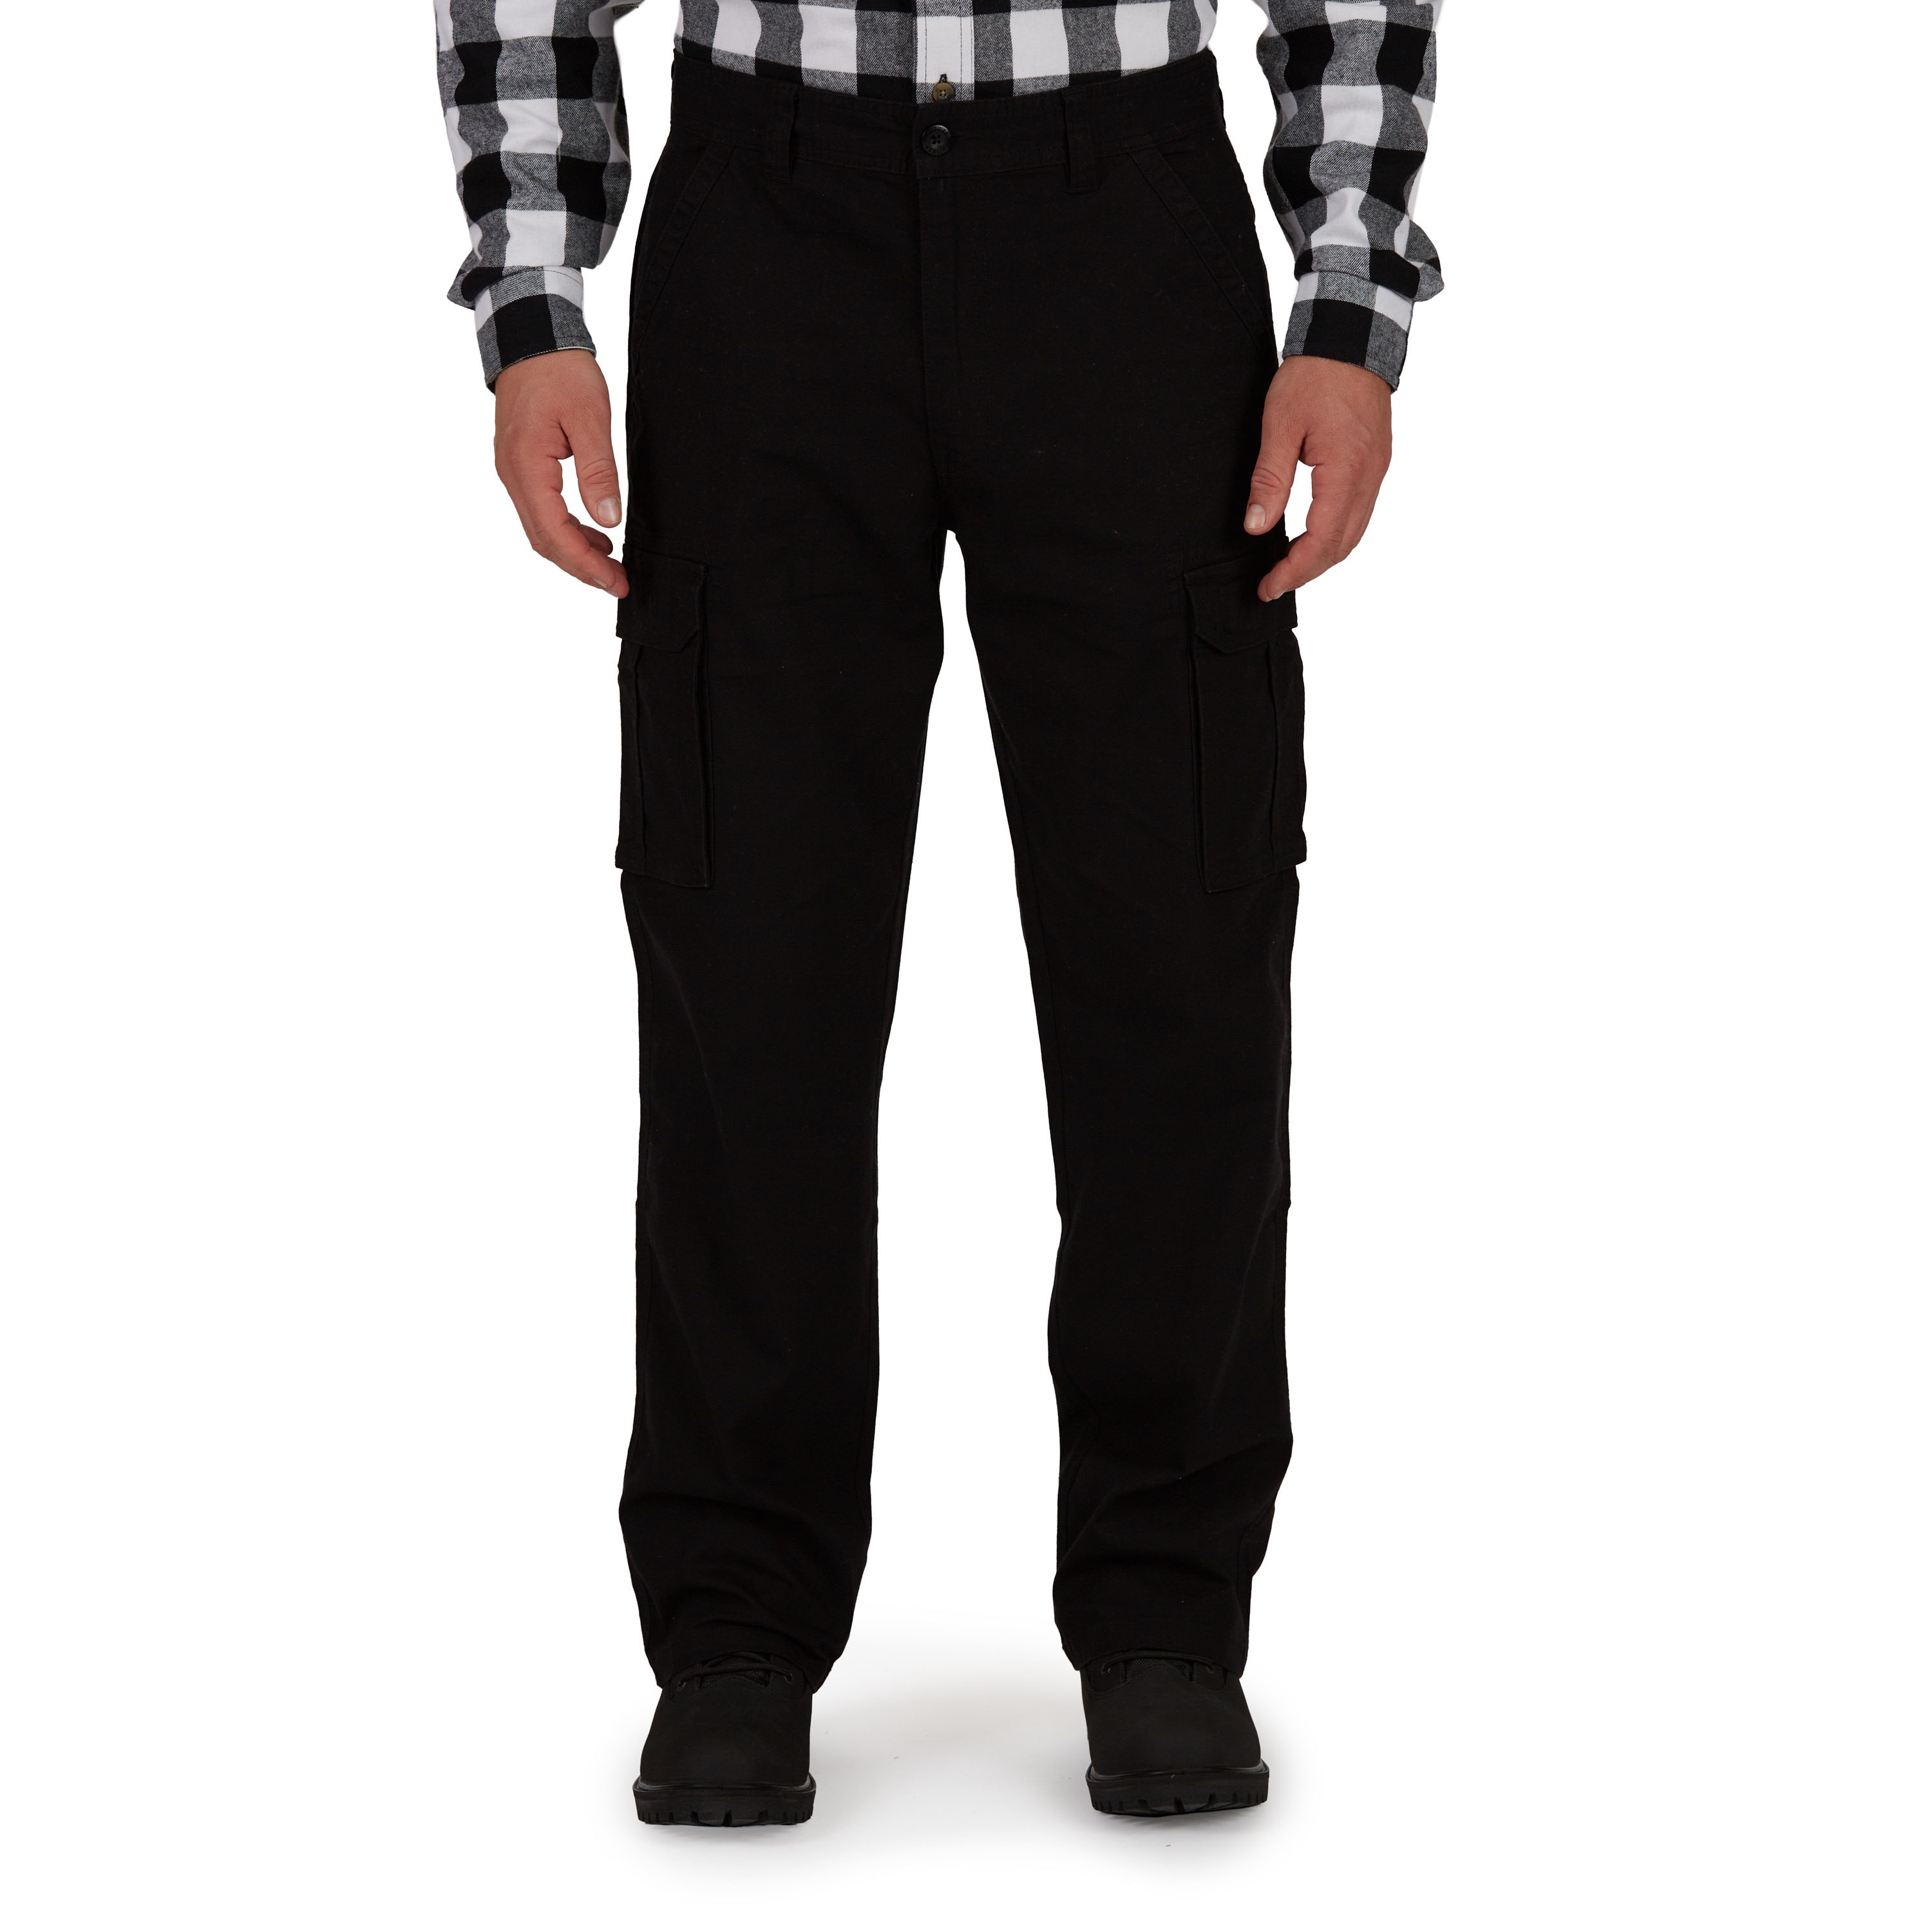 Black Stretch Tailored Girls Pants - Lowes Menswear